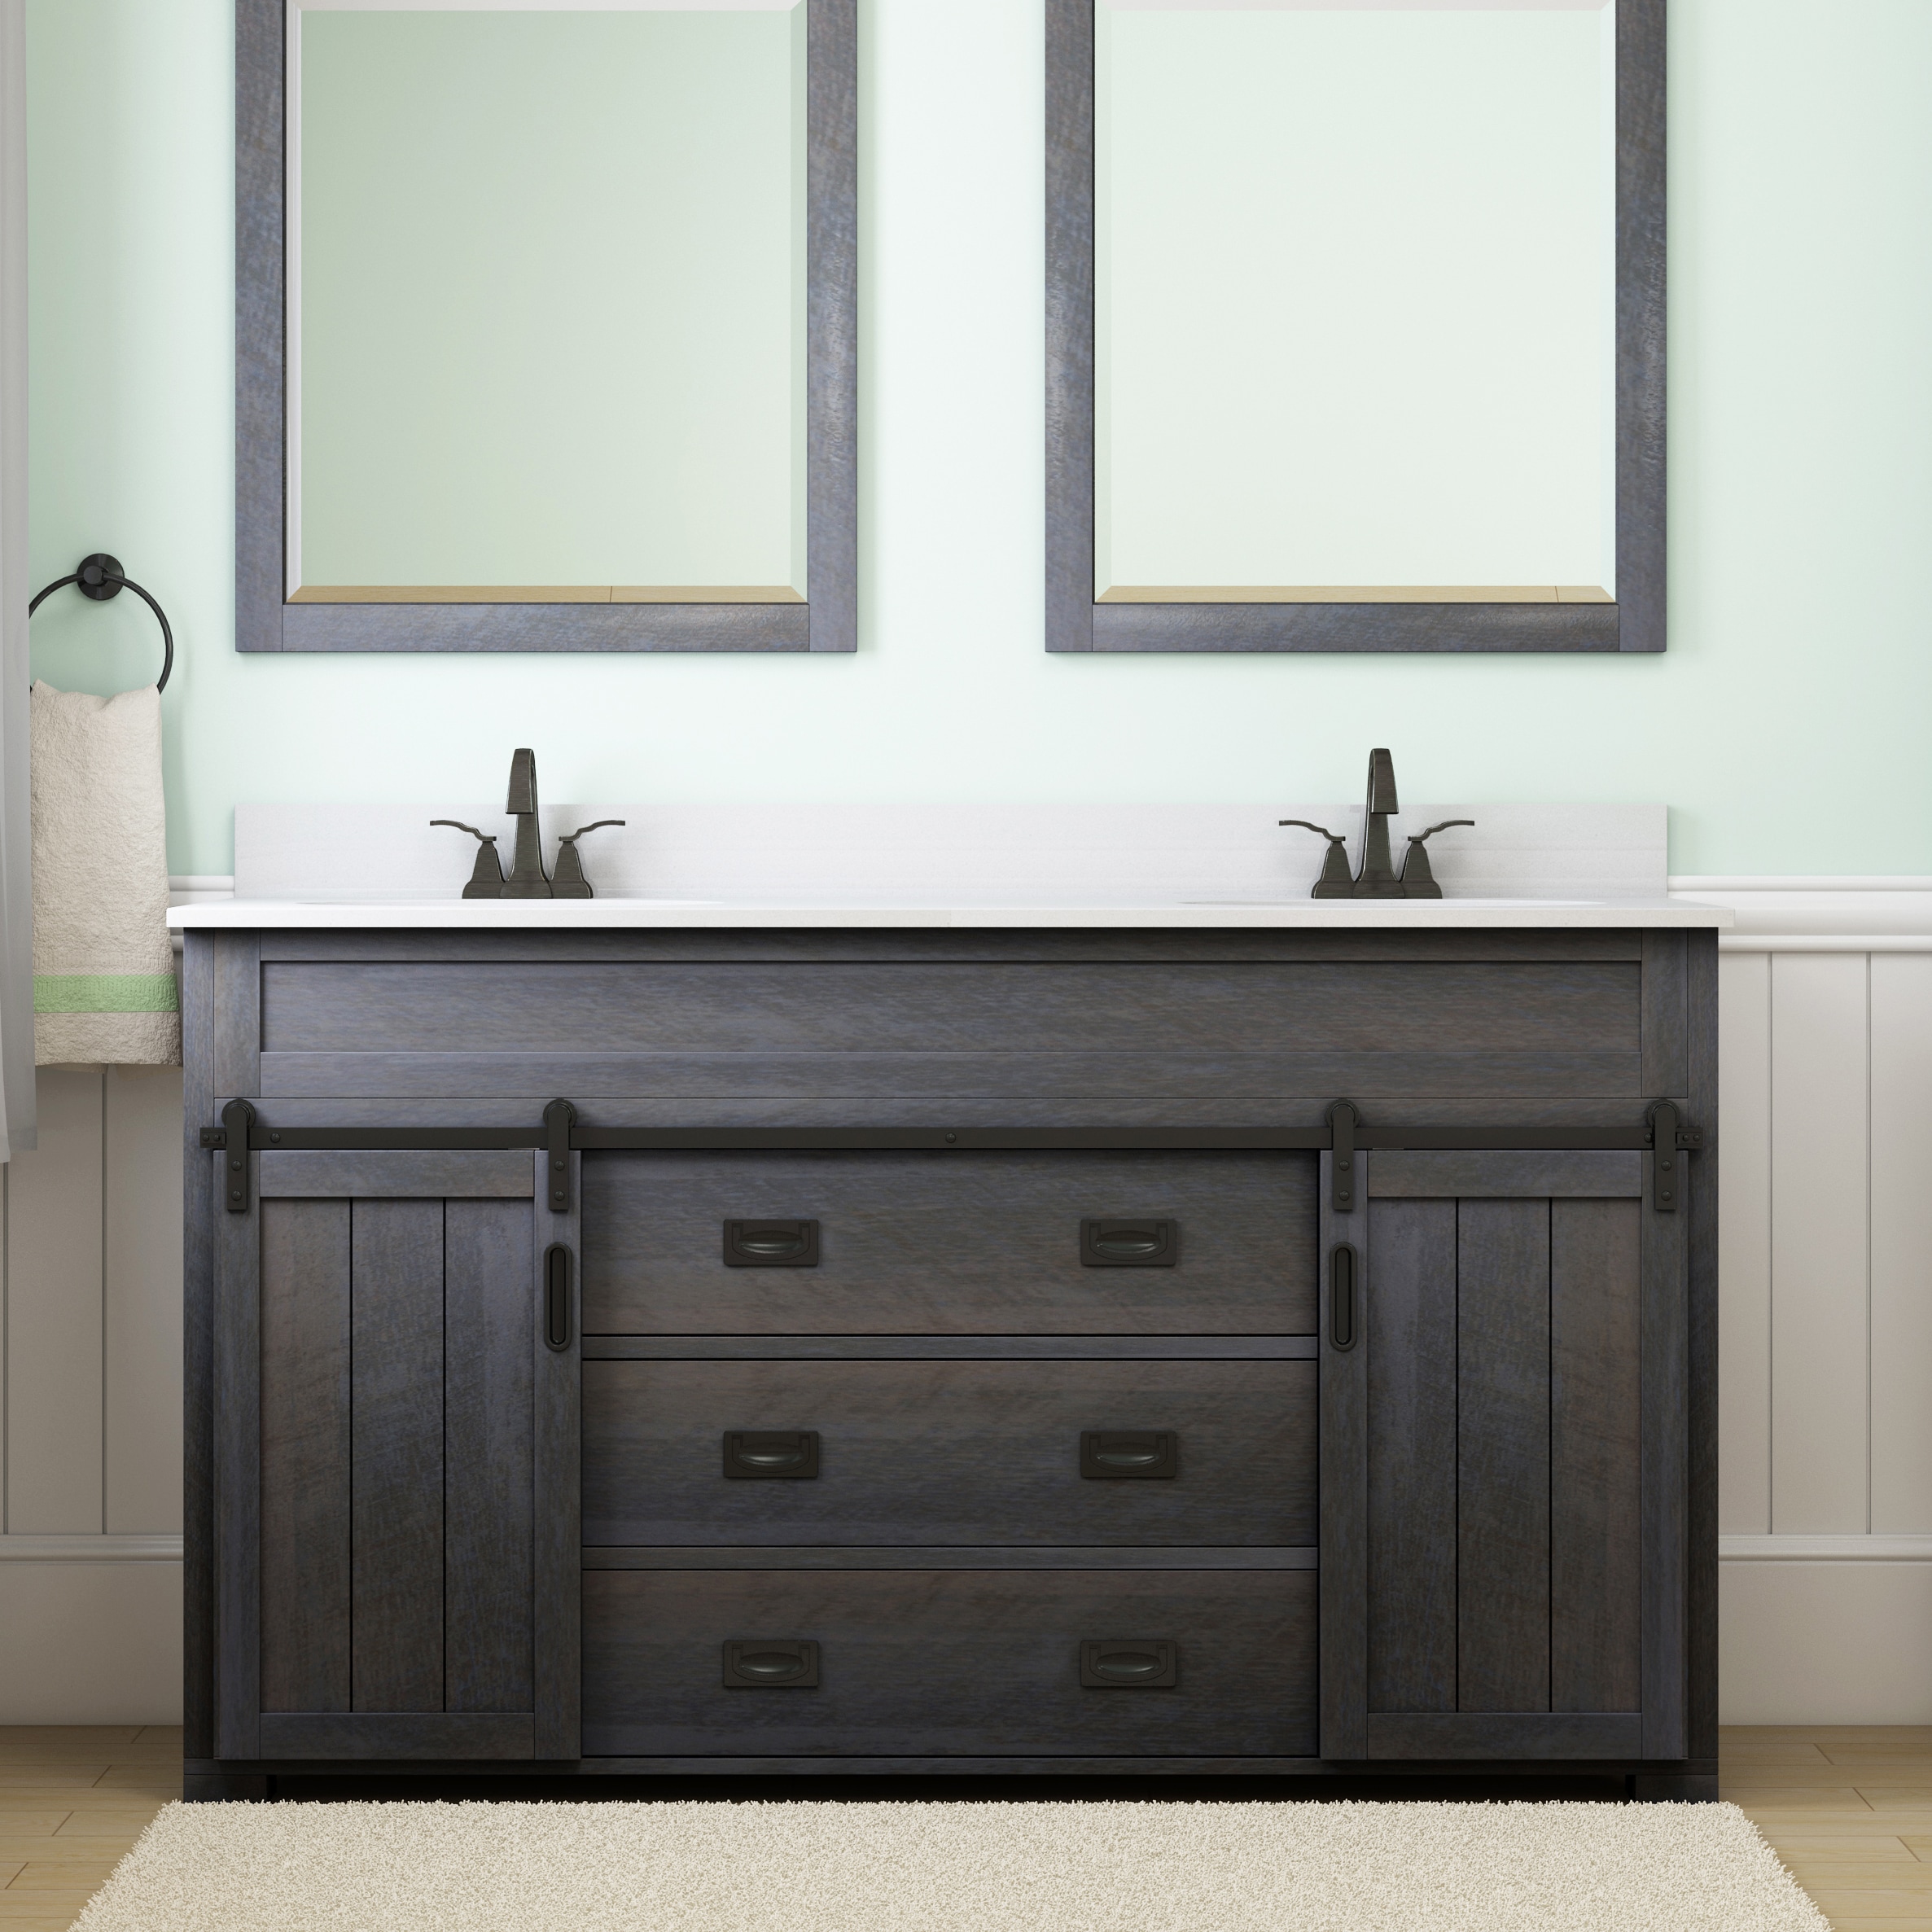 Style Selections Morriston 60 In Distressed Java Undermount Double Sink